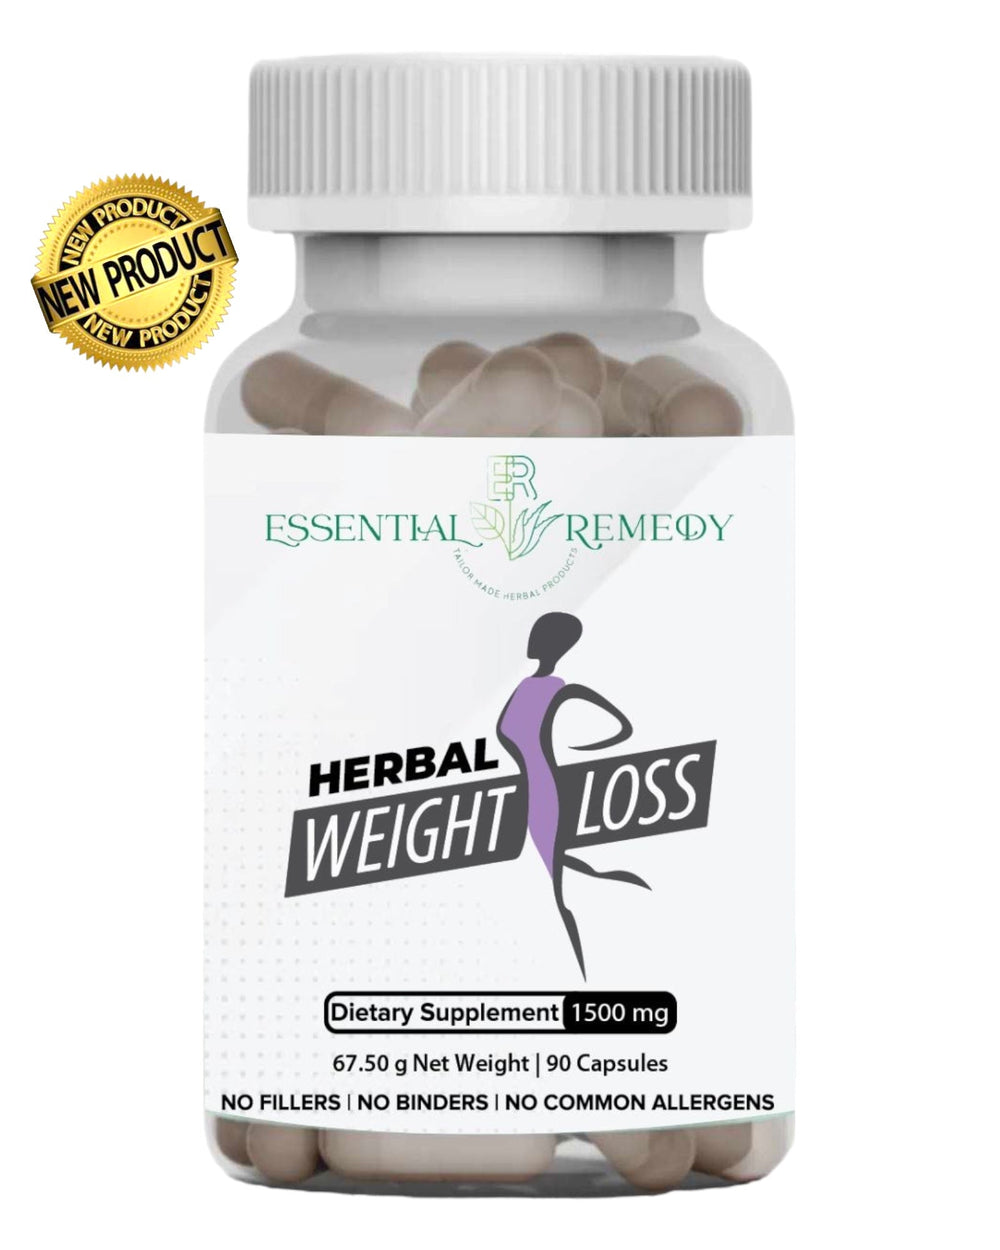 Herbal Weight Loss Capsules - Tailor Made Herbal Products